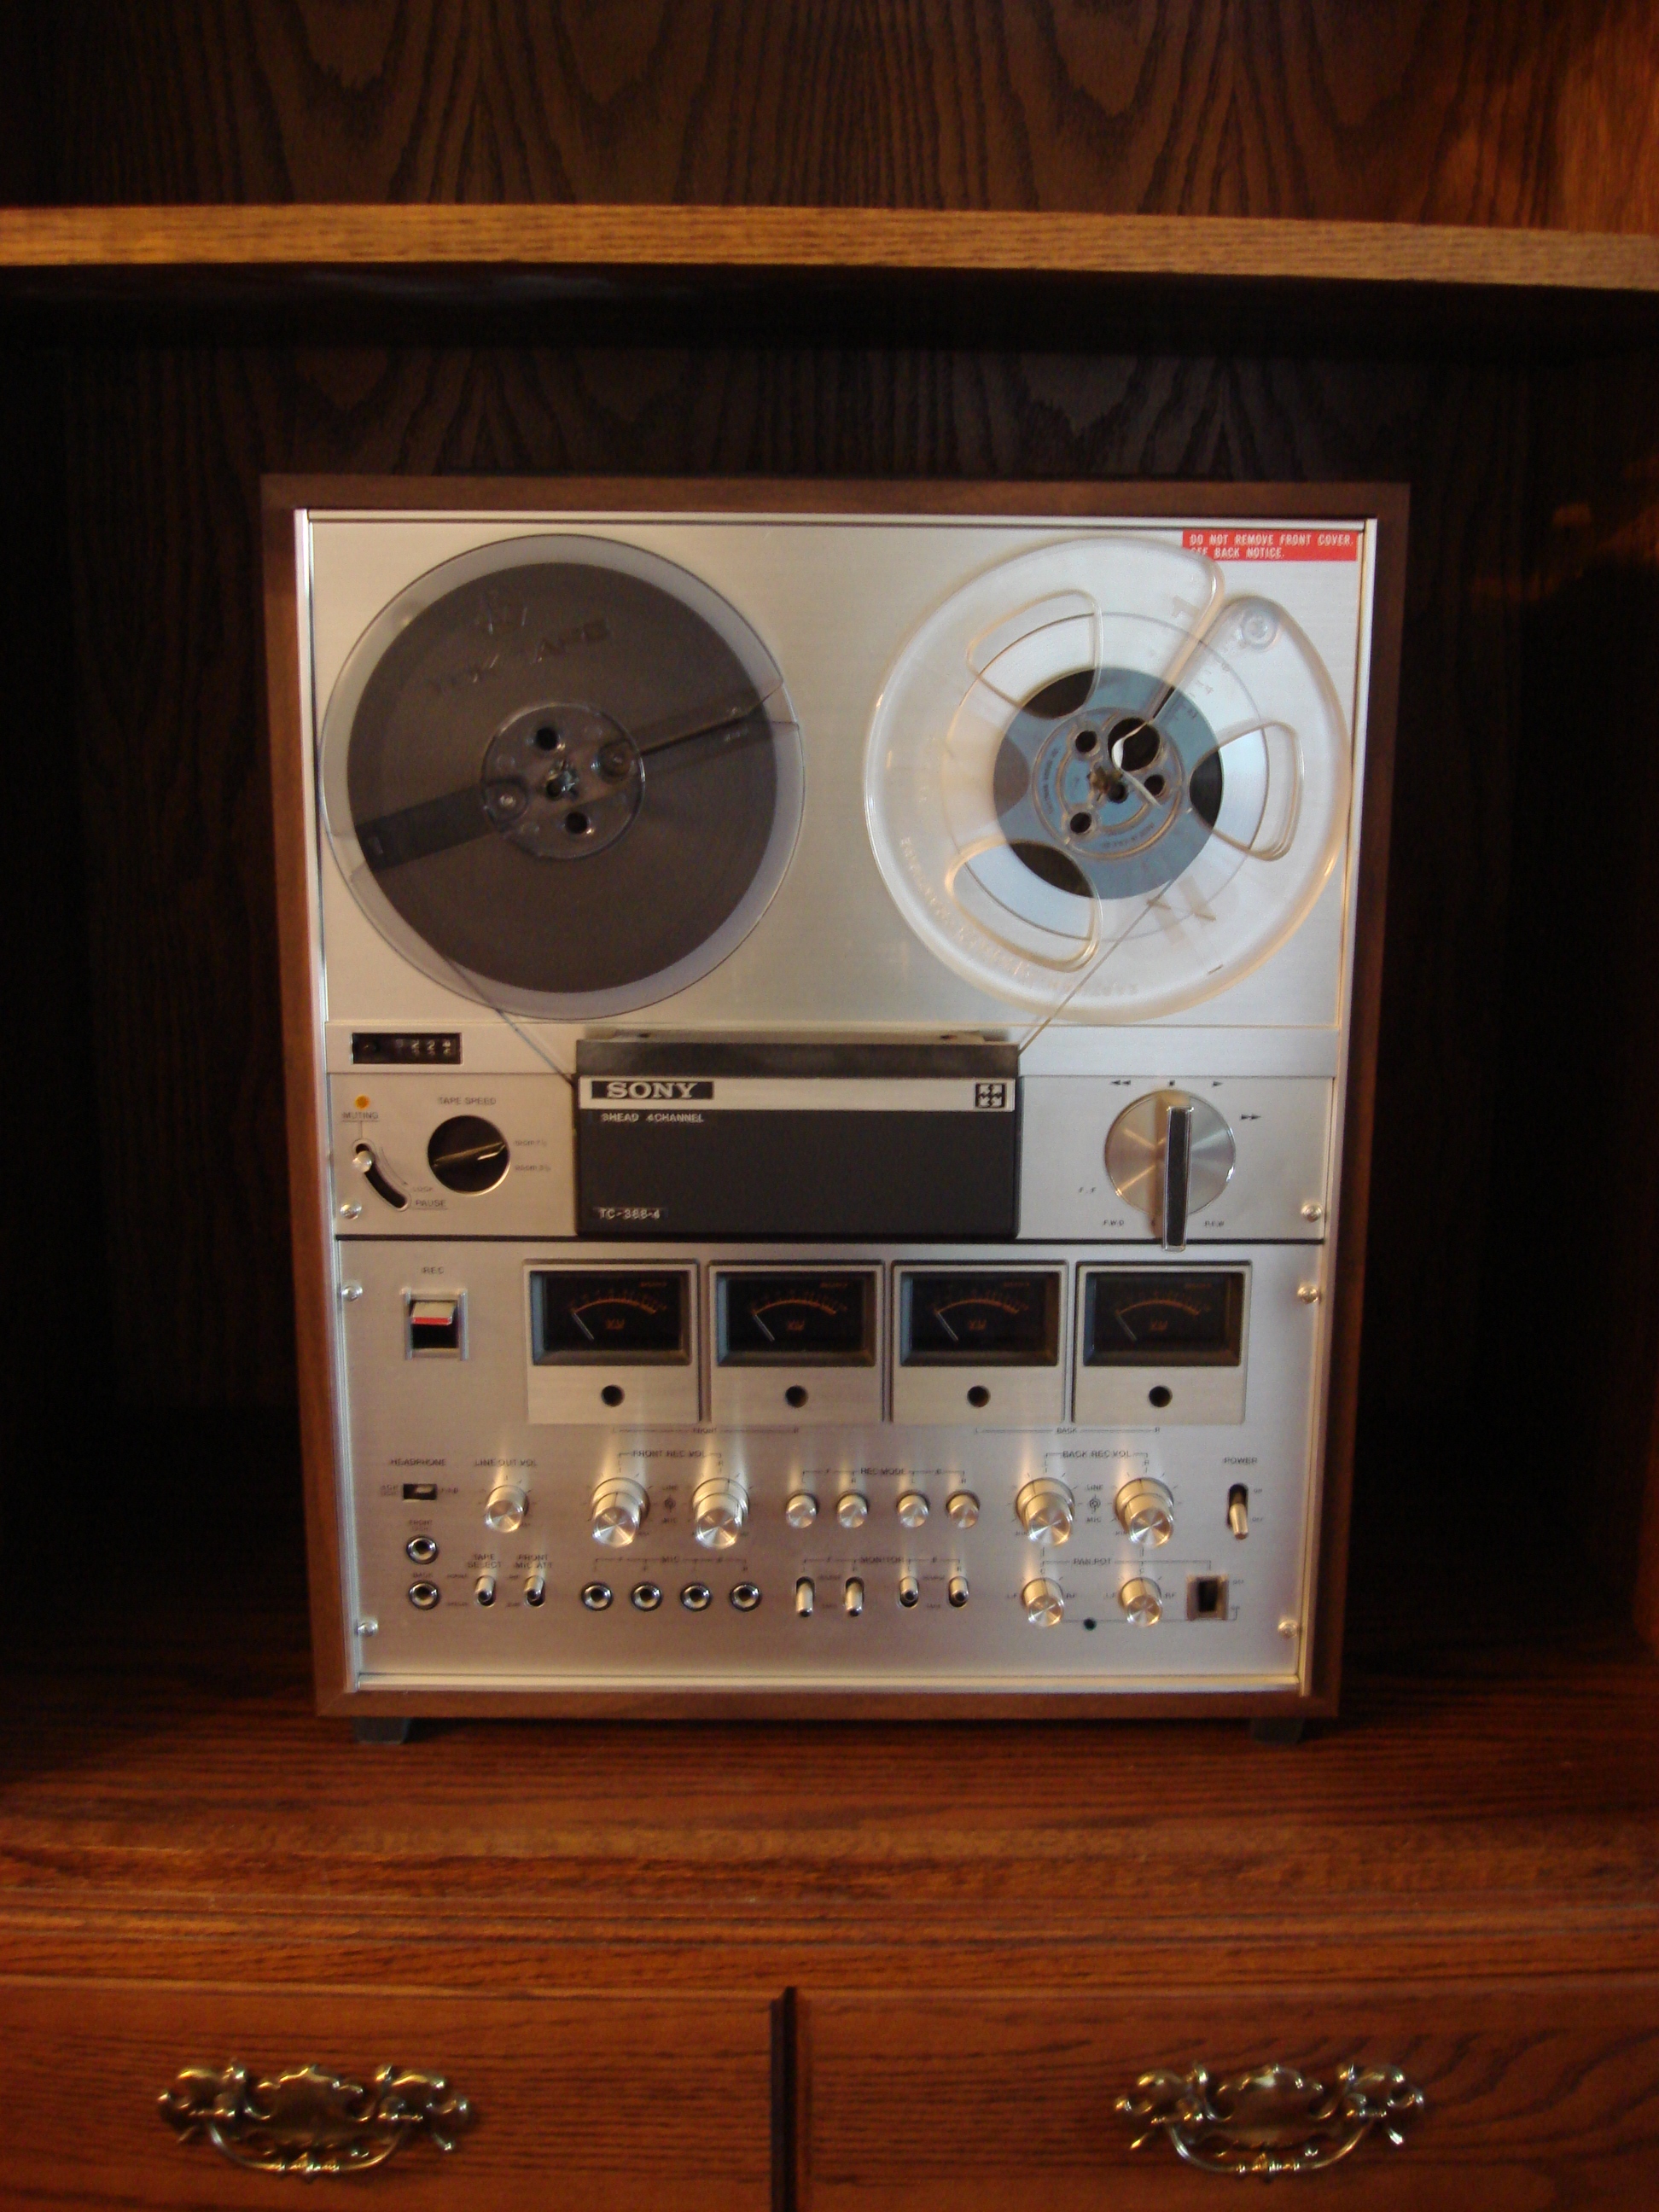 File:Sony Reel-to-Reel Tape Player TC-388-4 (4031272650).jpg - Wikimedia  Commons